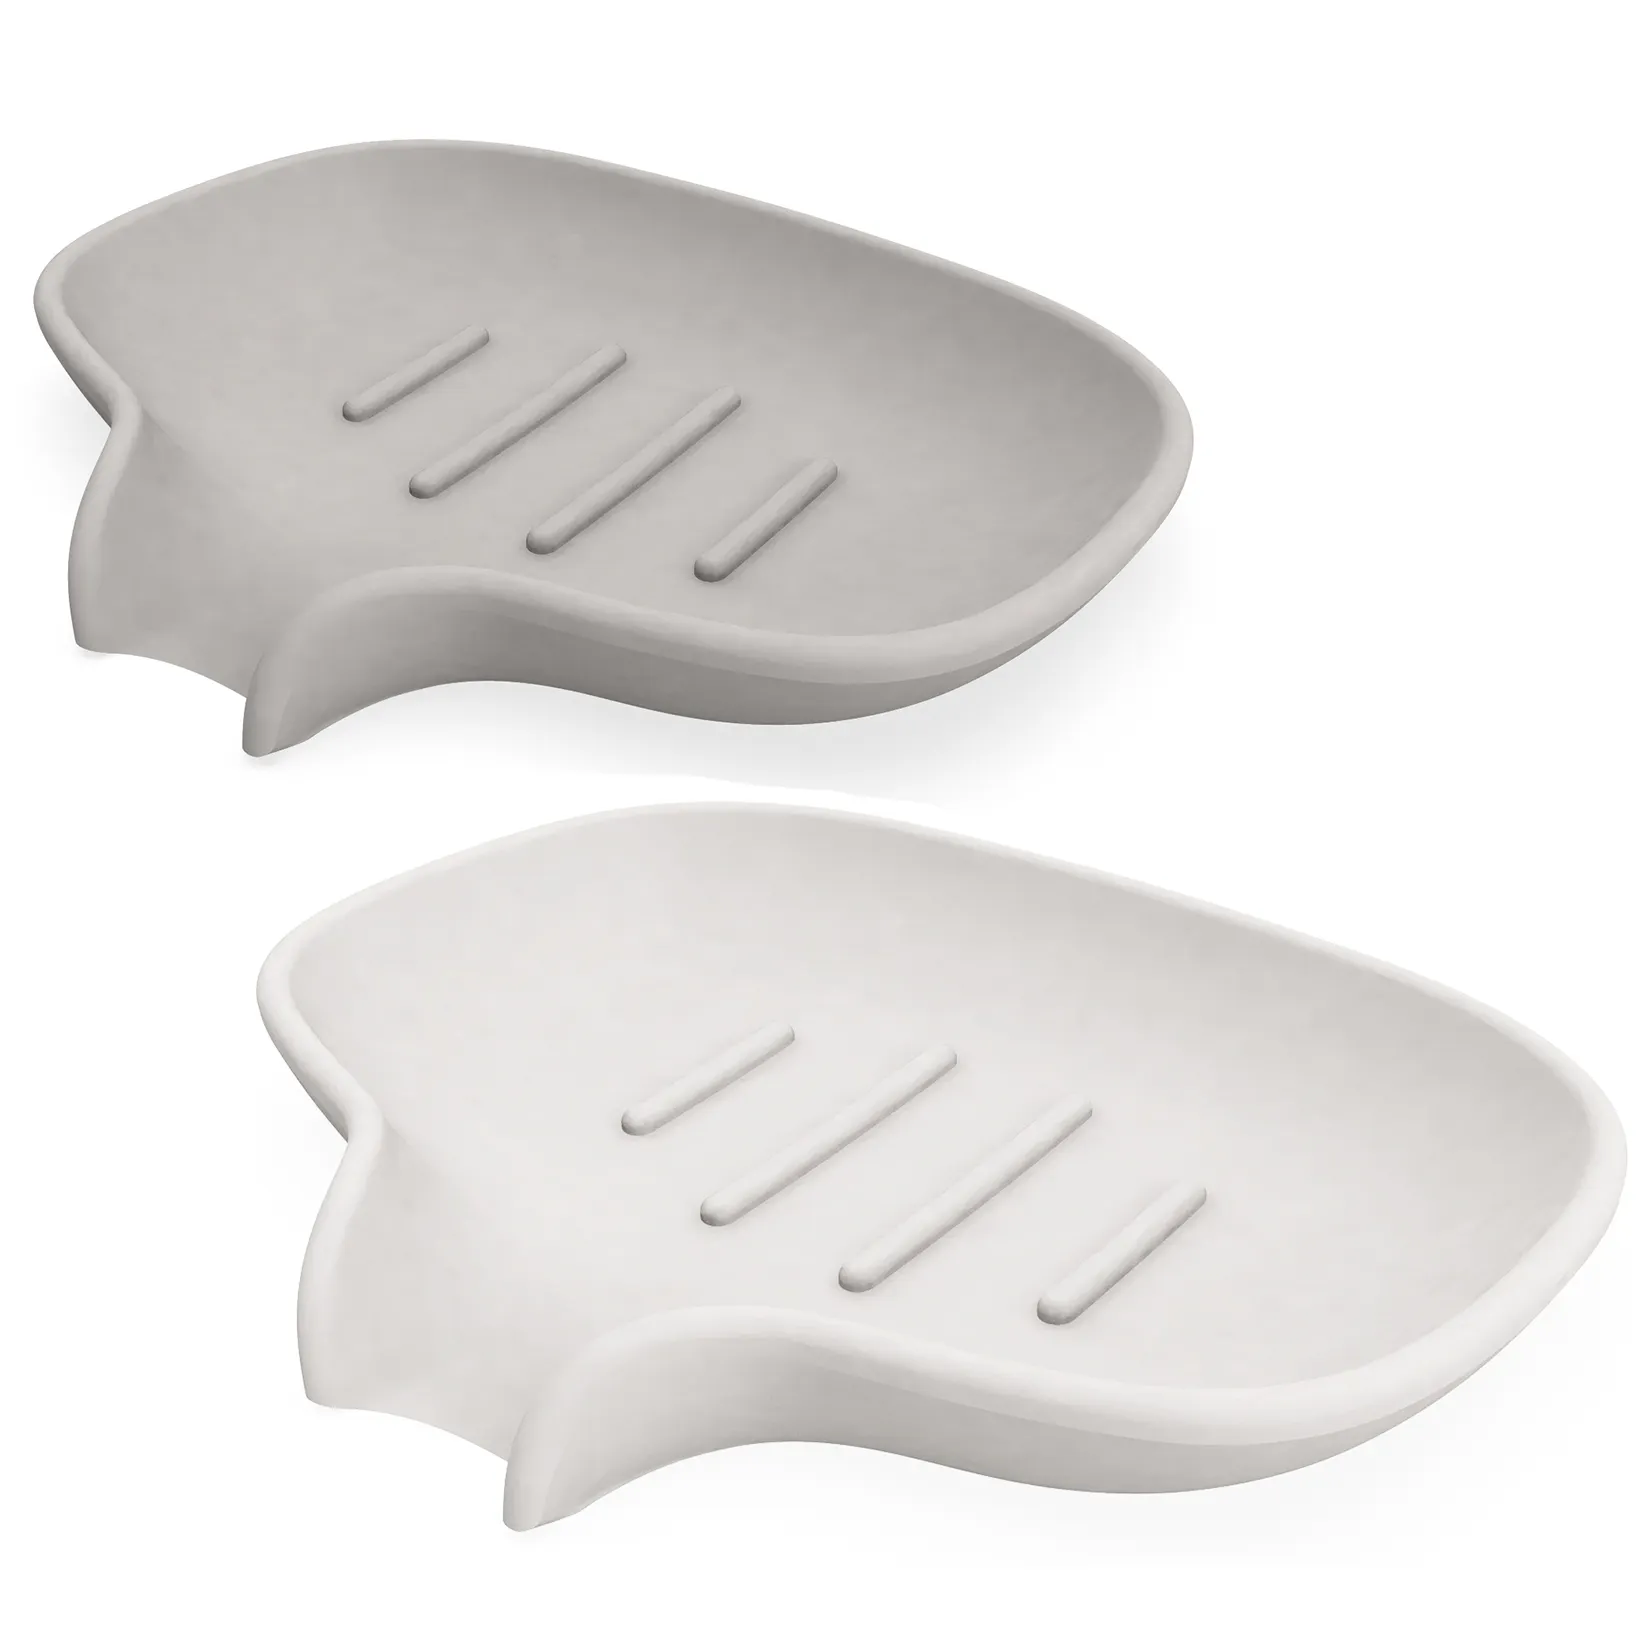 Set of 2 Silicone Soap Dish for Bathroom Bar Soap Holder for Shower with Draining Tray Waterfall Soap Tray for Kitchen Sink